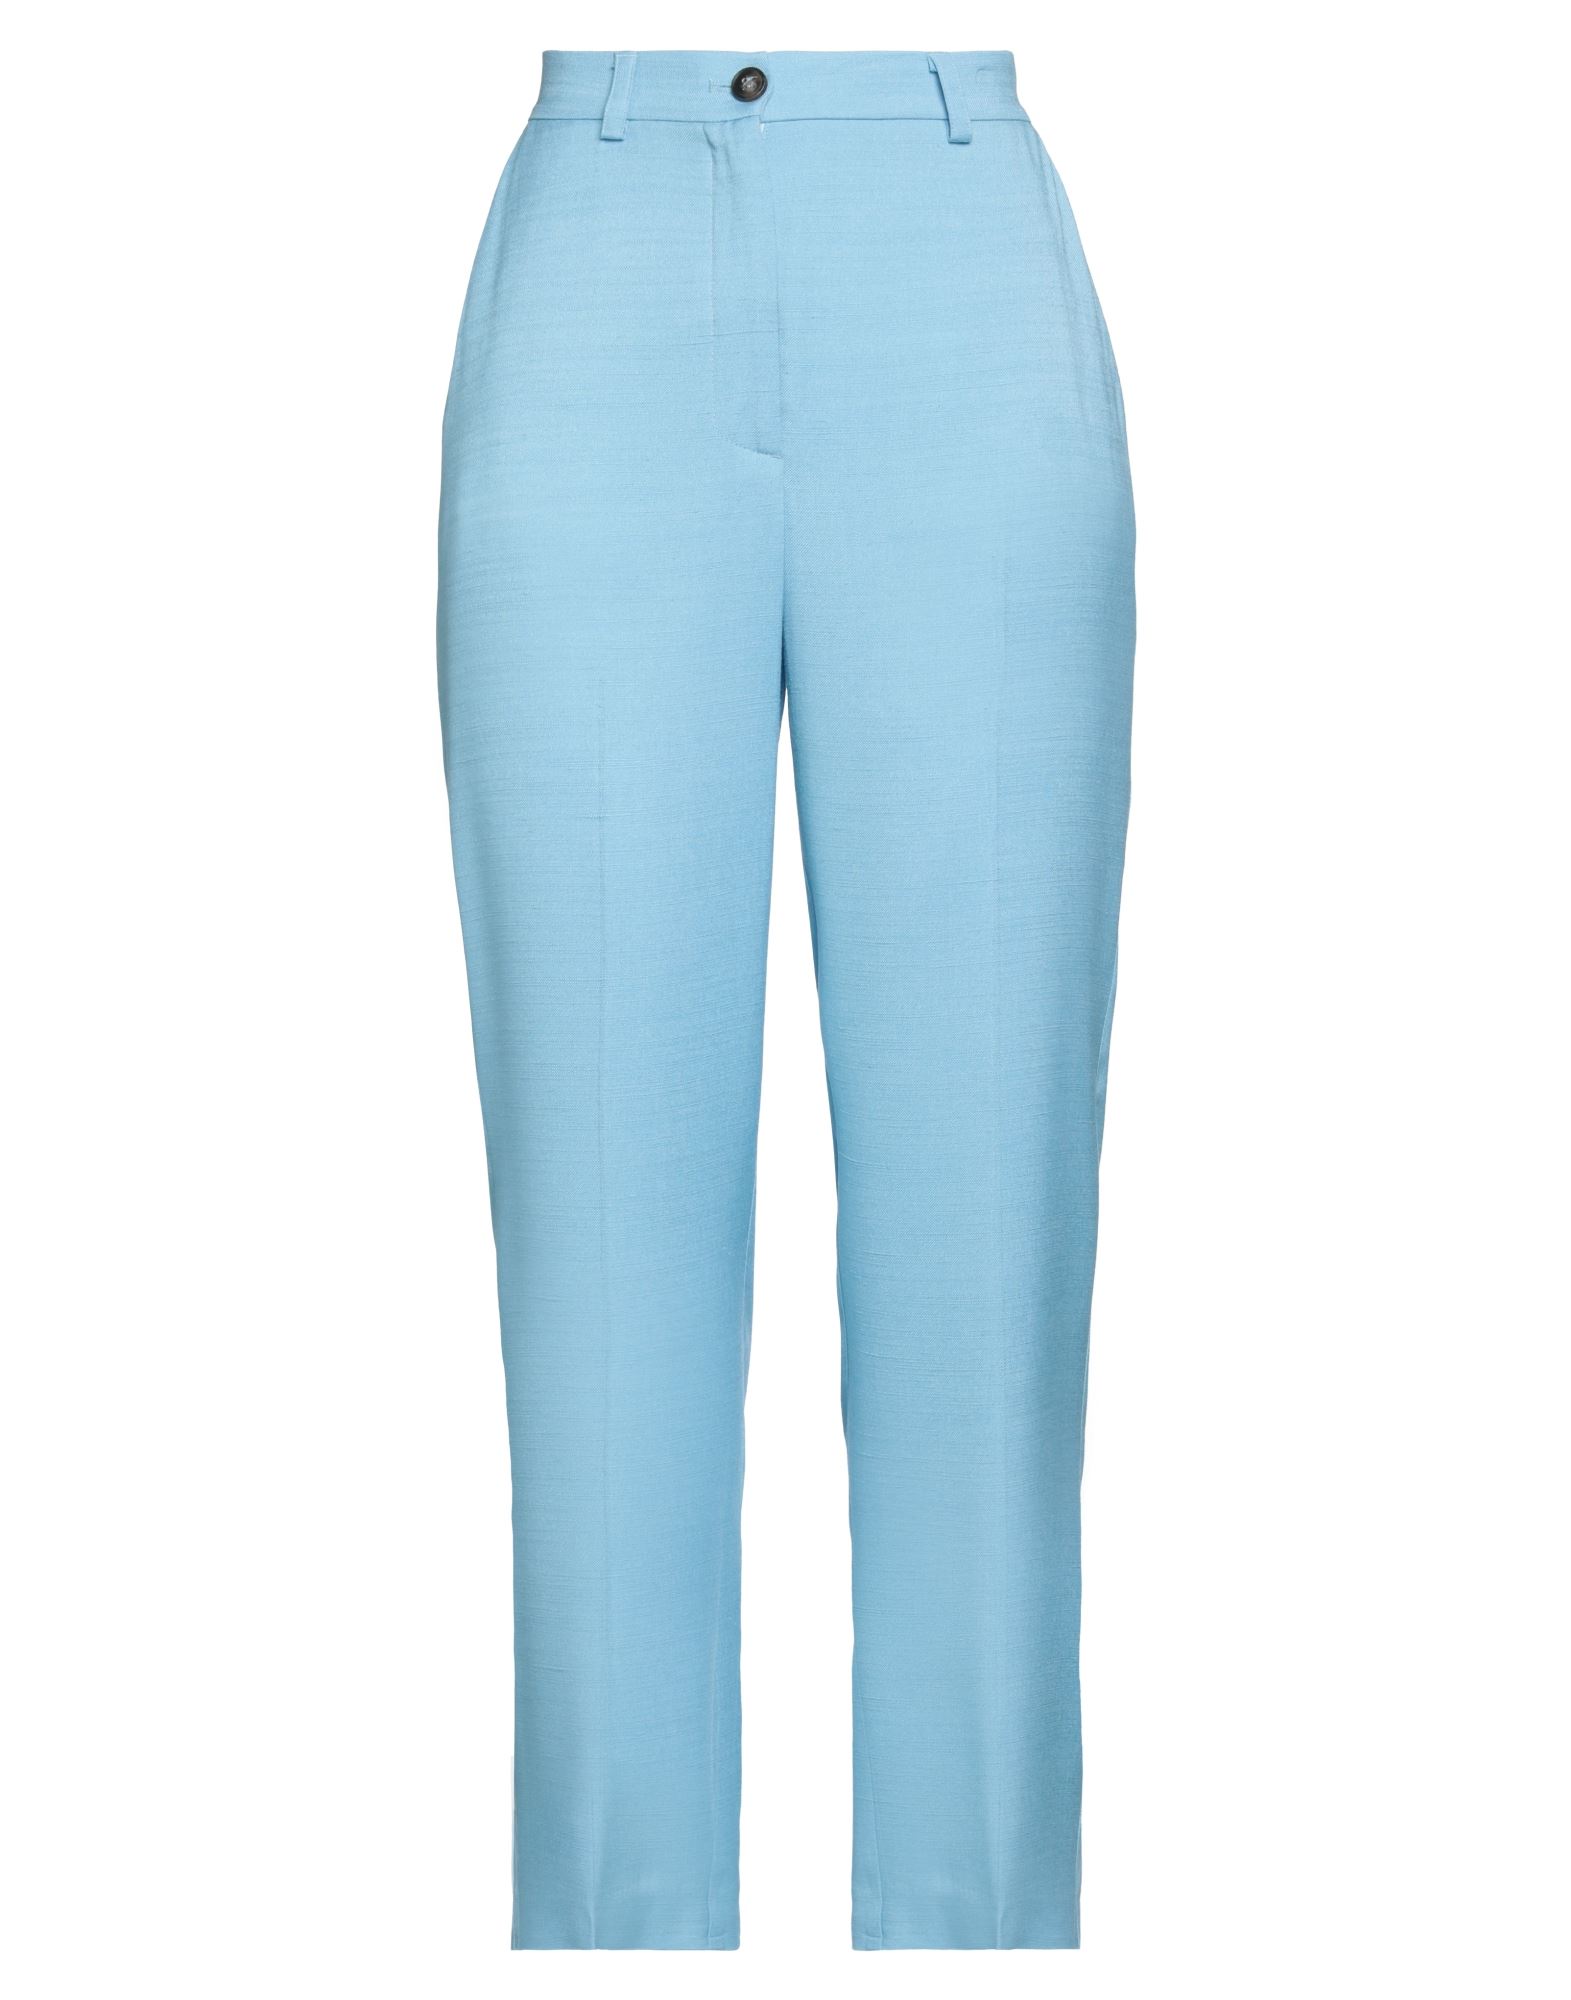 Rue 8isquit Pants In Blue